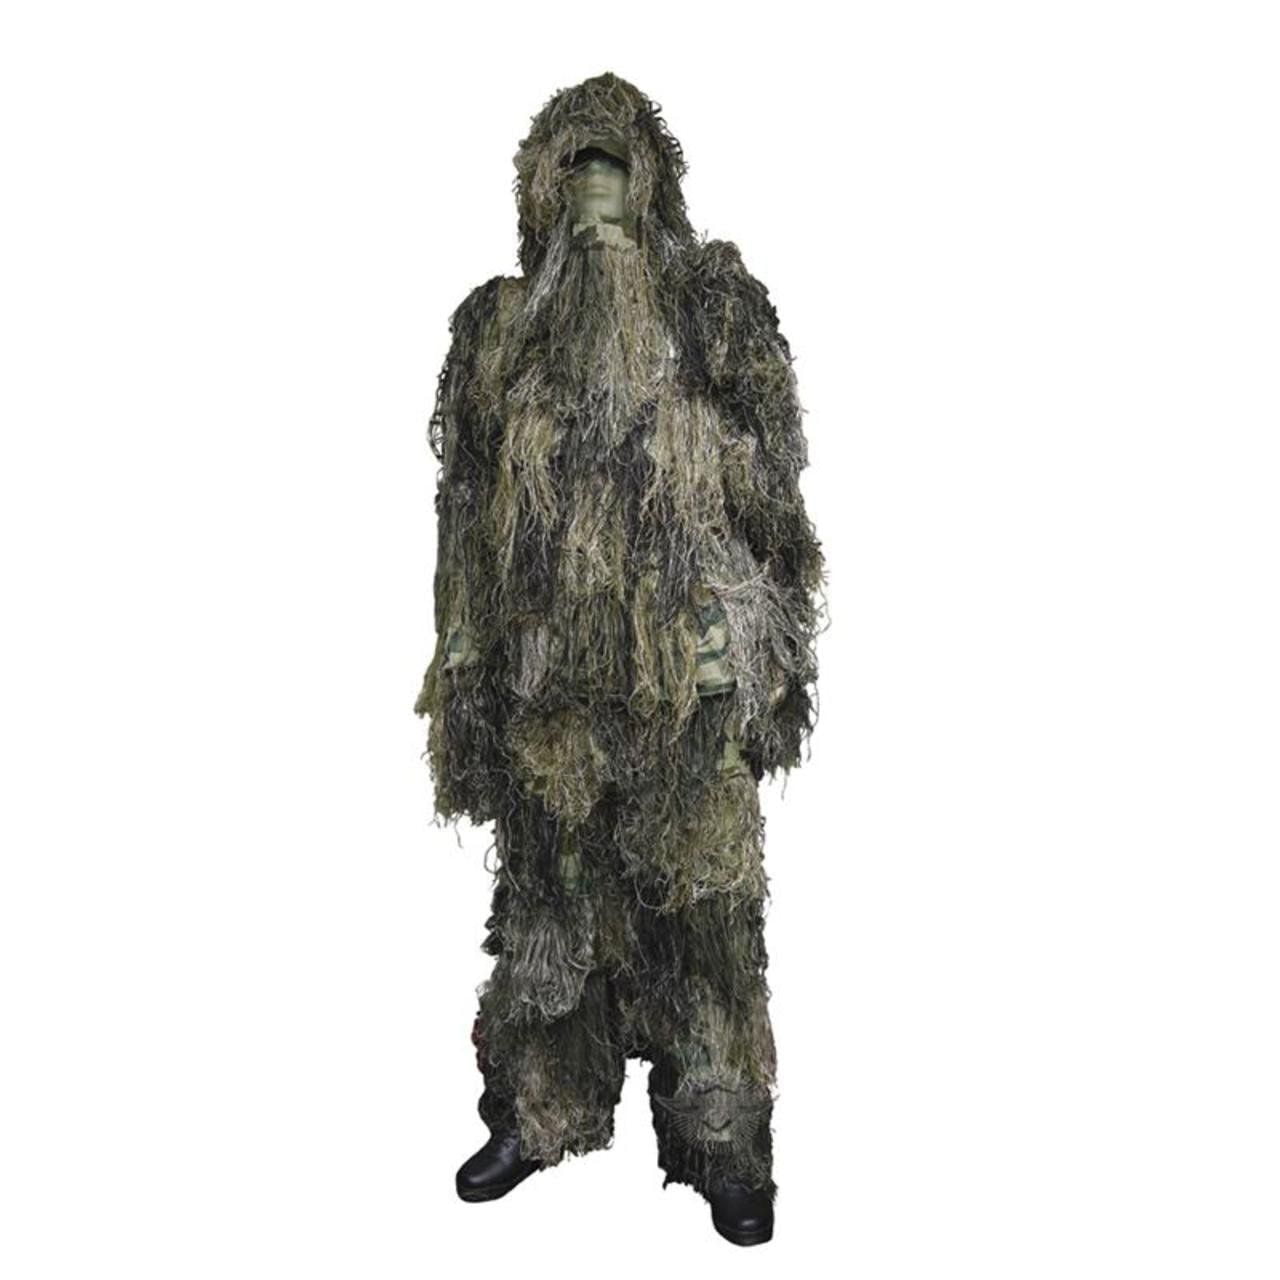 Children'sCamouflage Uniform Ghillie Suit Camo Woodland Camouflage Fores Hunting 